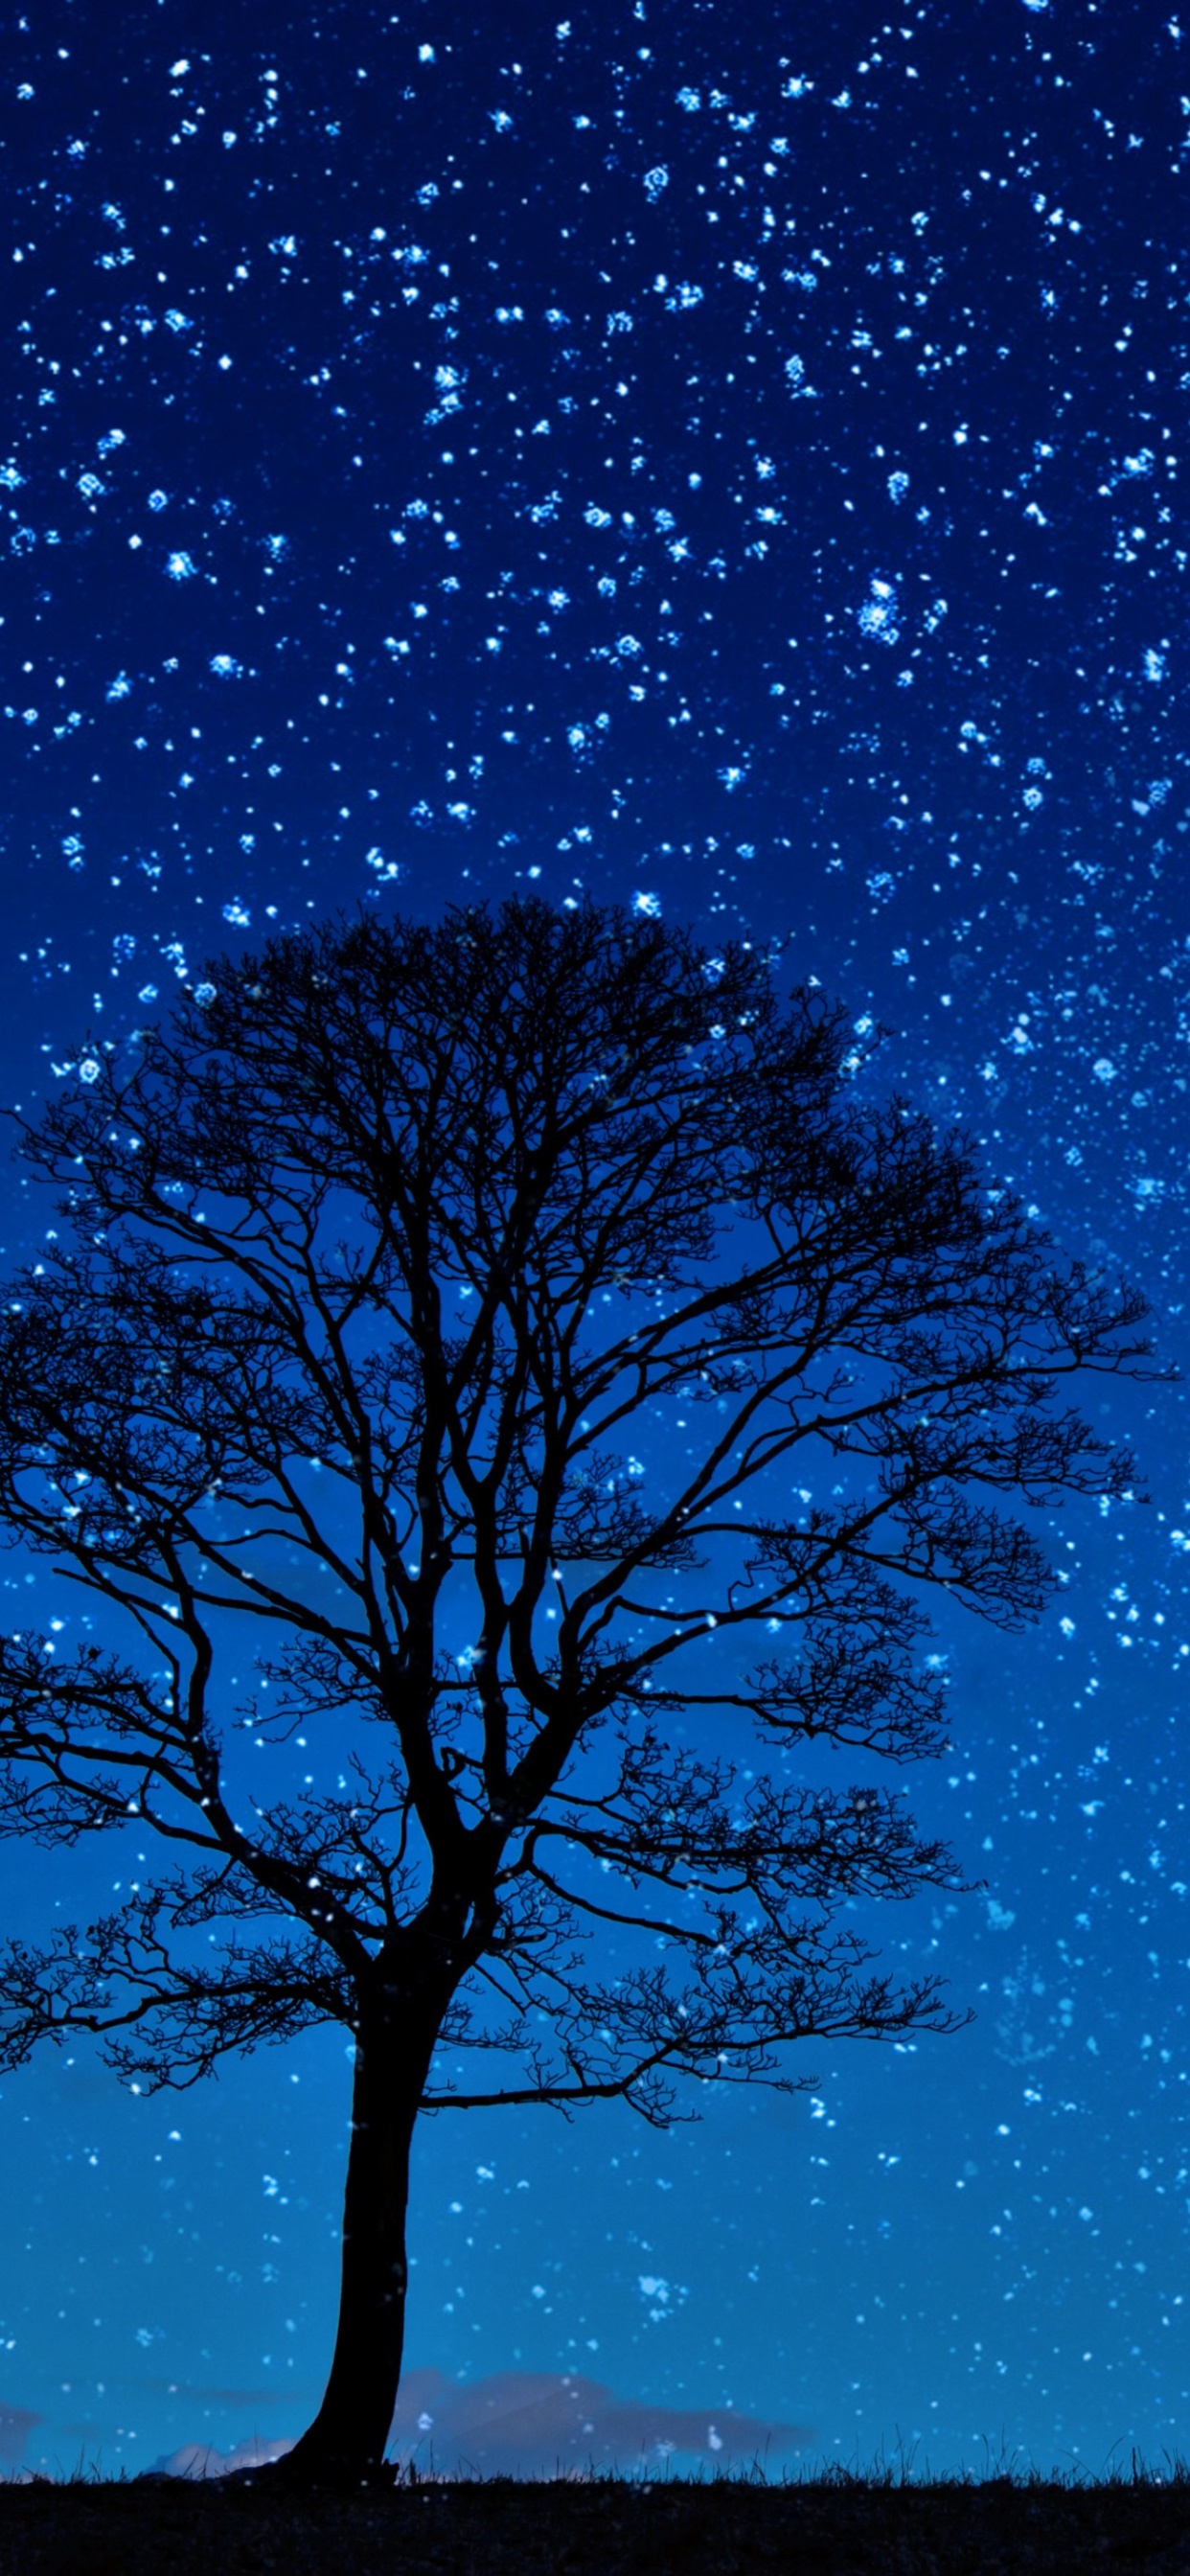 Silhouette of Man Standing Near Bare Tree Under Blue Sky During Night Time. Wallpaper in 1242x2688 Resolution